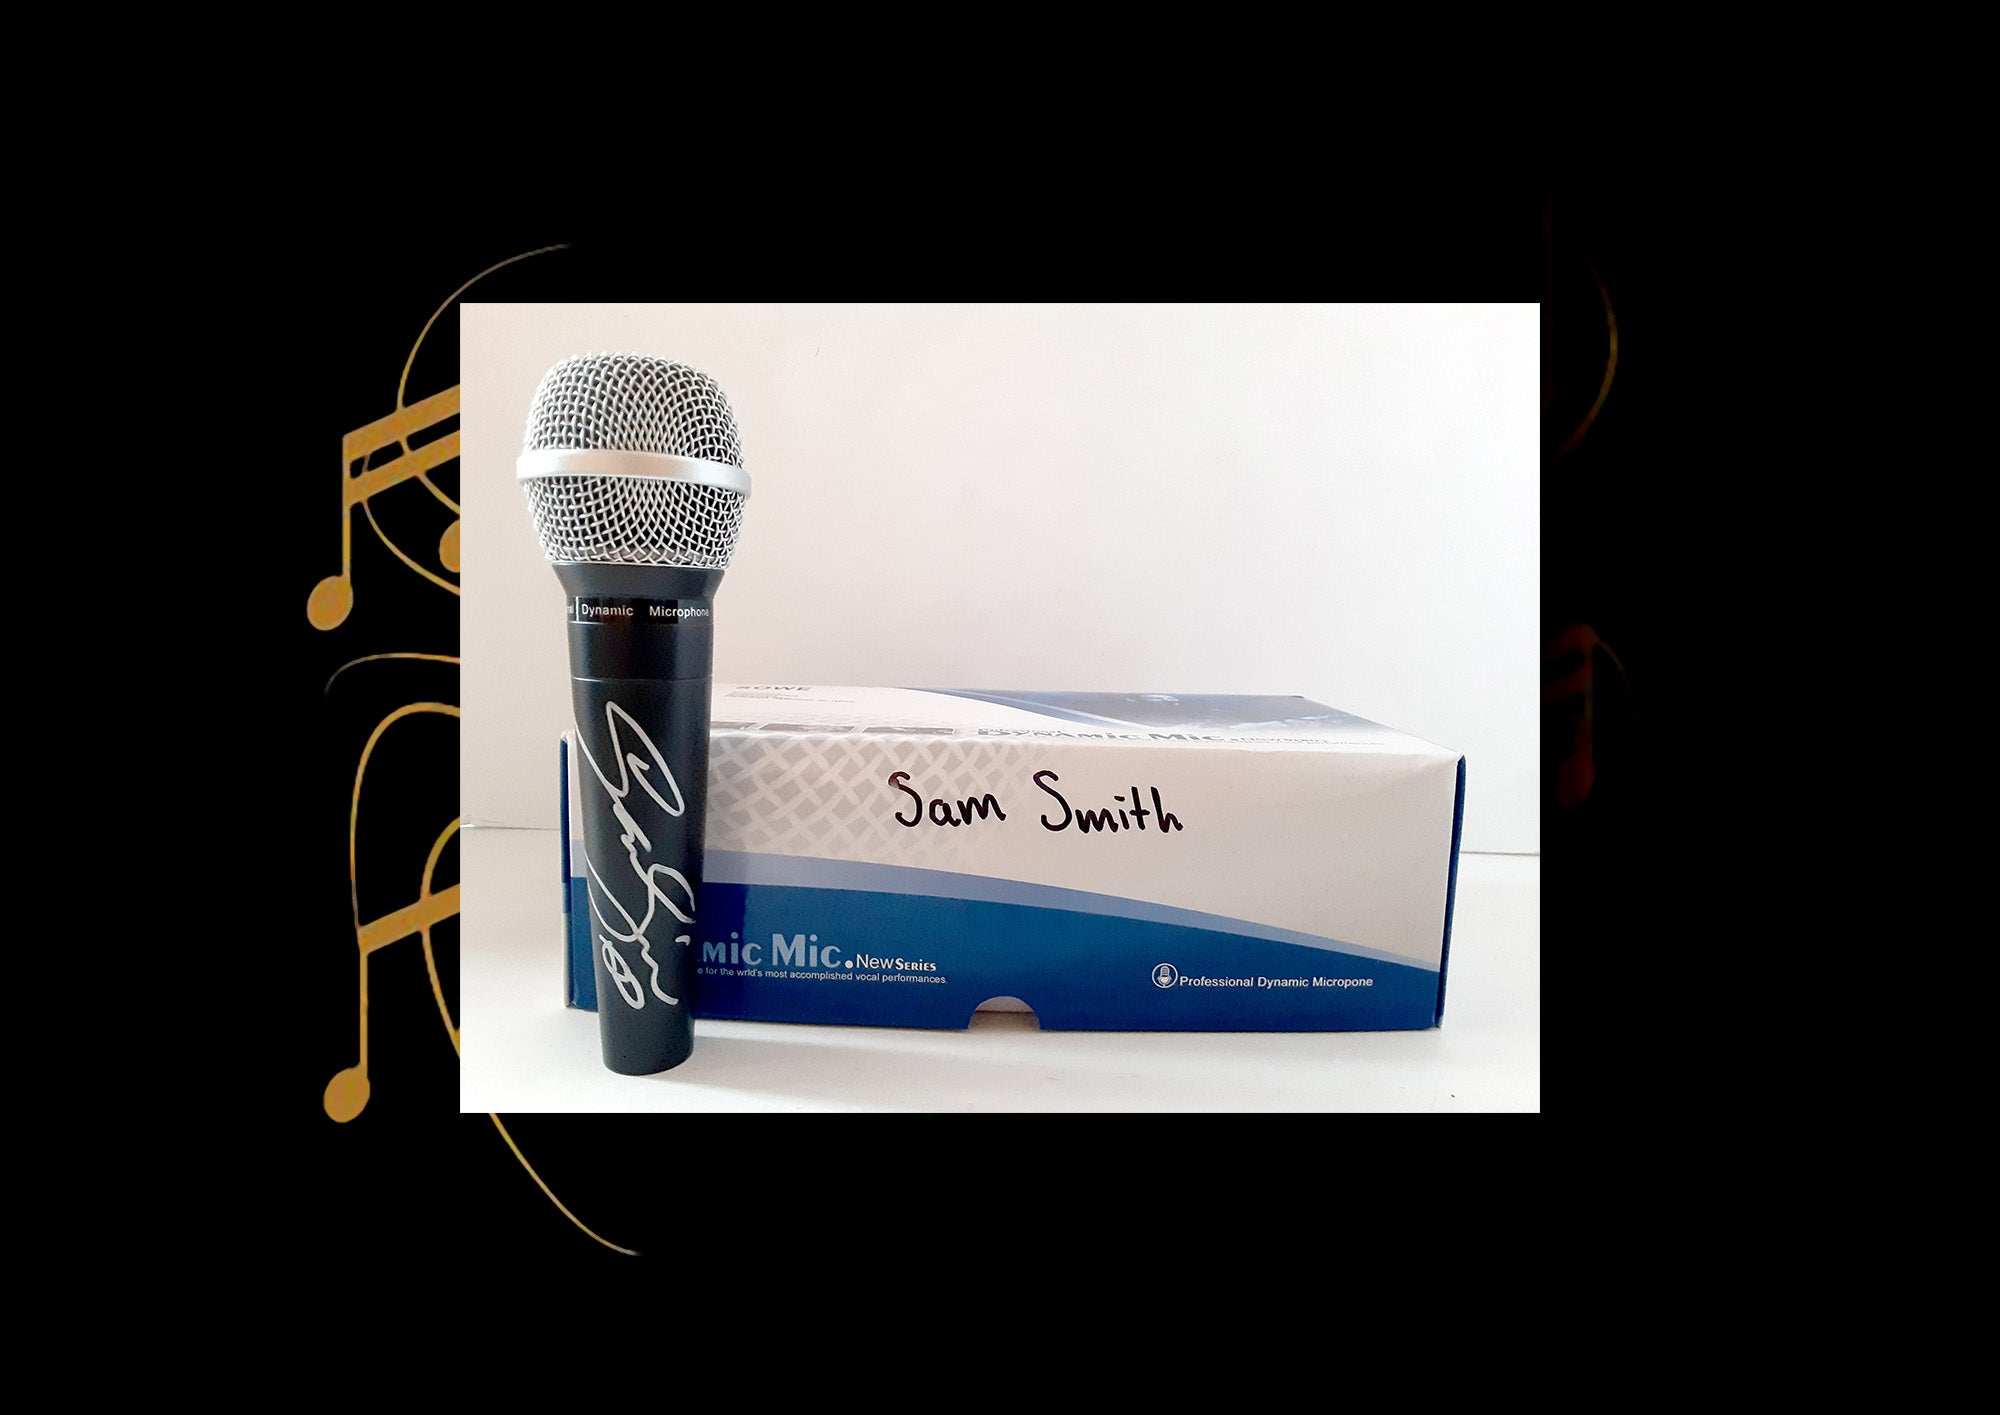 Sam Smith microphone signed with proof